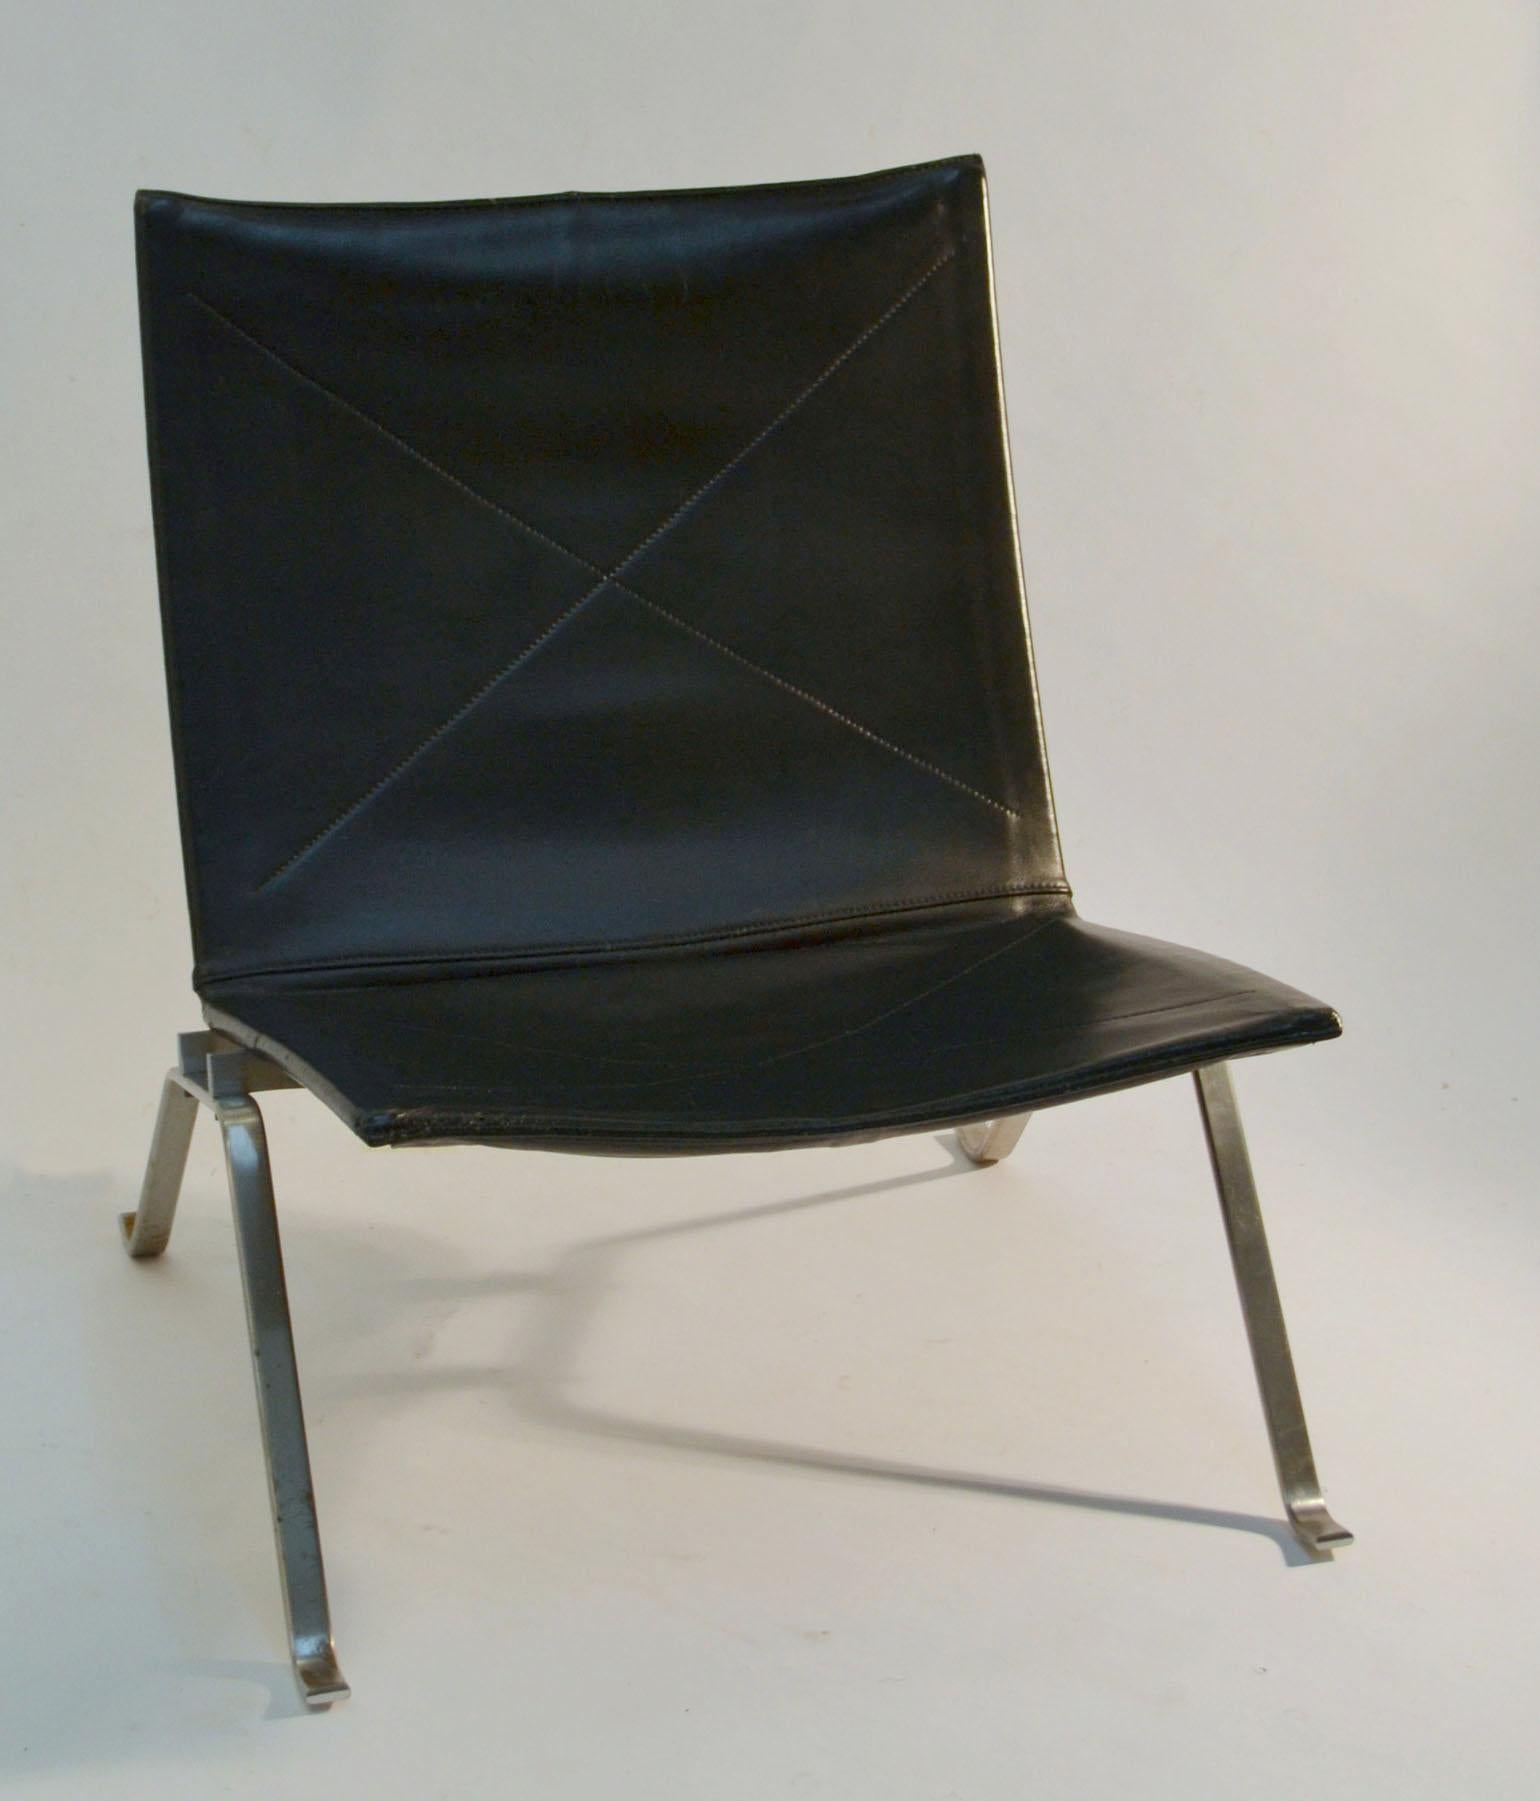 The elegant pair of PK-22 Black leather and steel frame structure of the lounge chairs designed by Poul Kjaerholm 1957 in Copenhagen, under license by Fritz Hansen 1990s. This iconic model PK-22 is probably Kjærholms most famous design. The chair